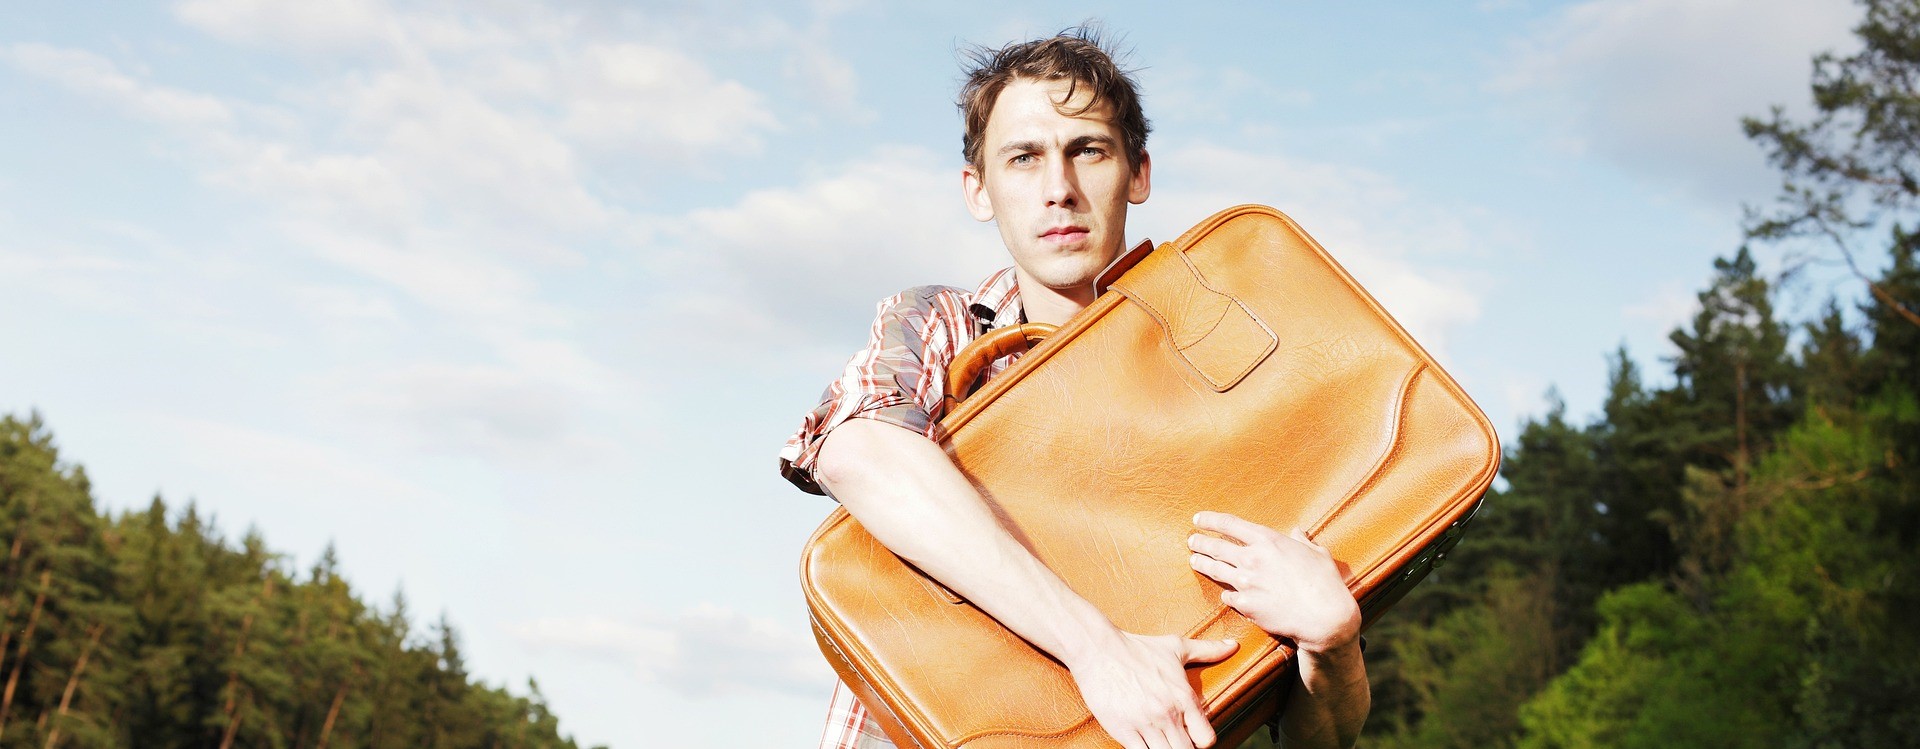 Desperate looking man holding a piece of luggage